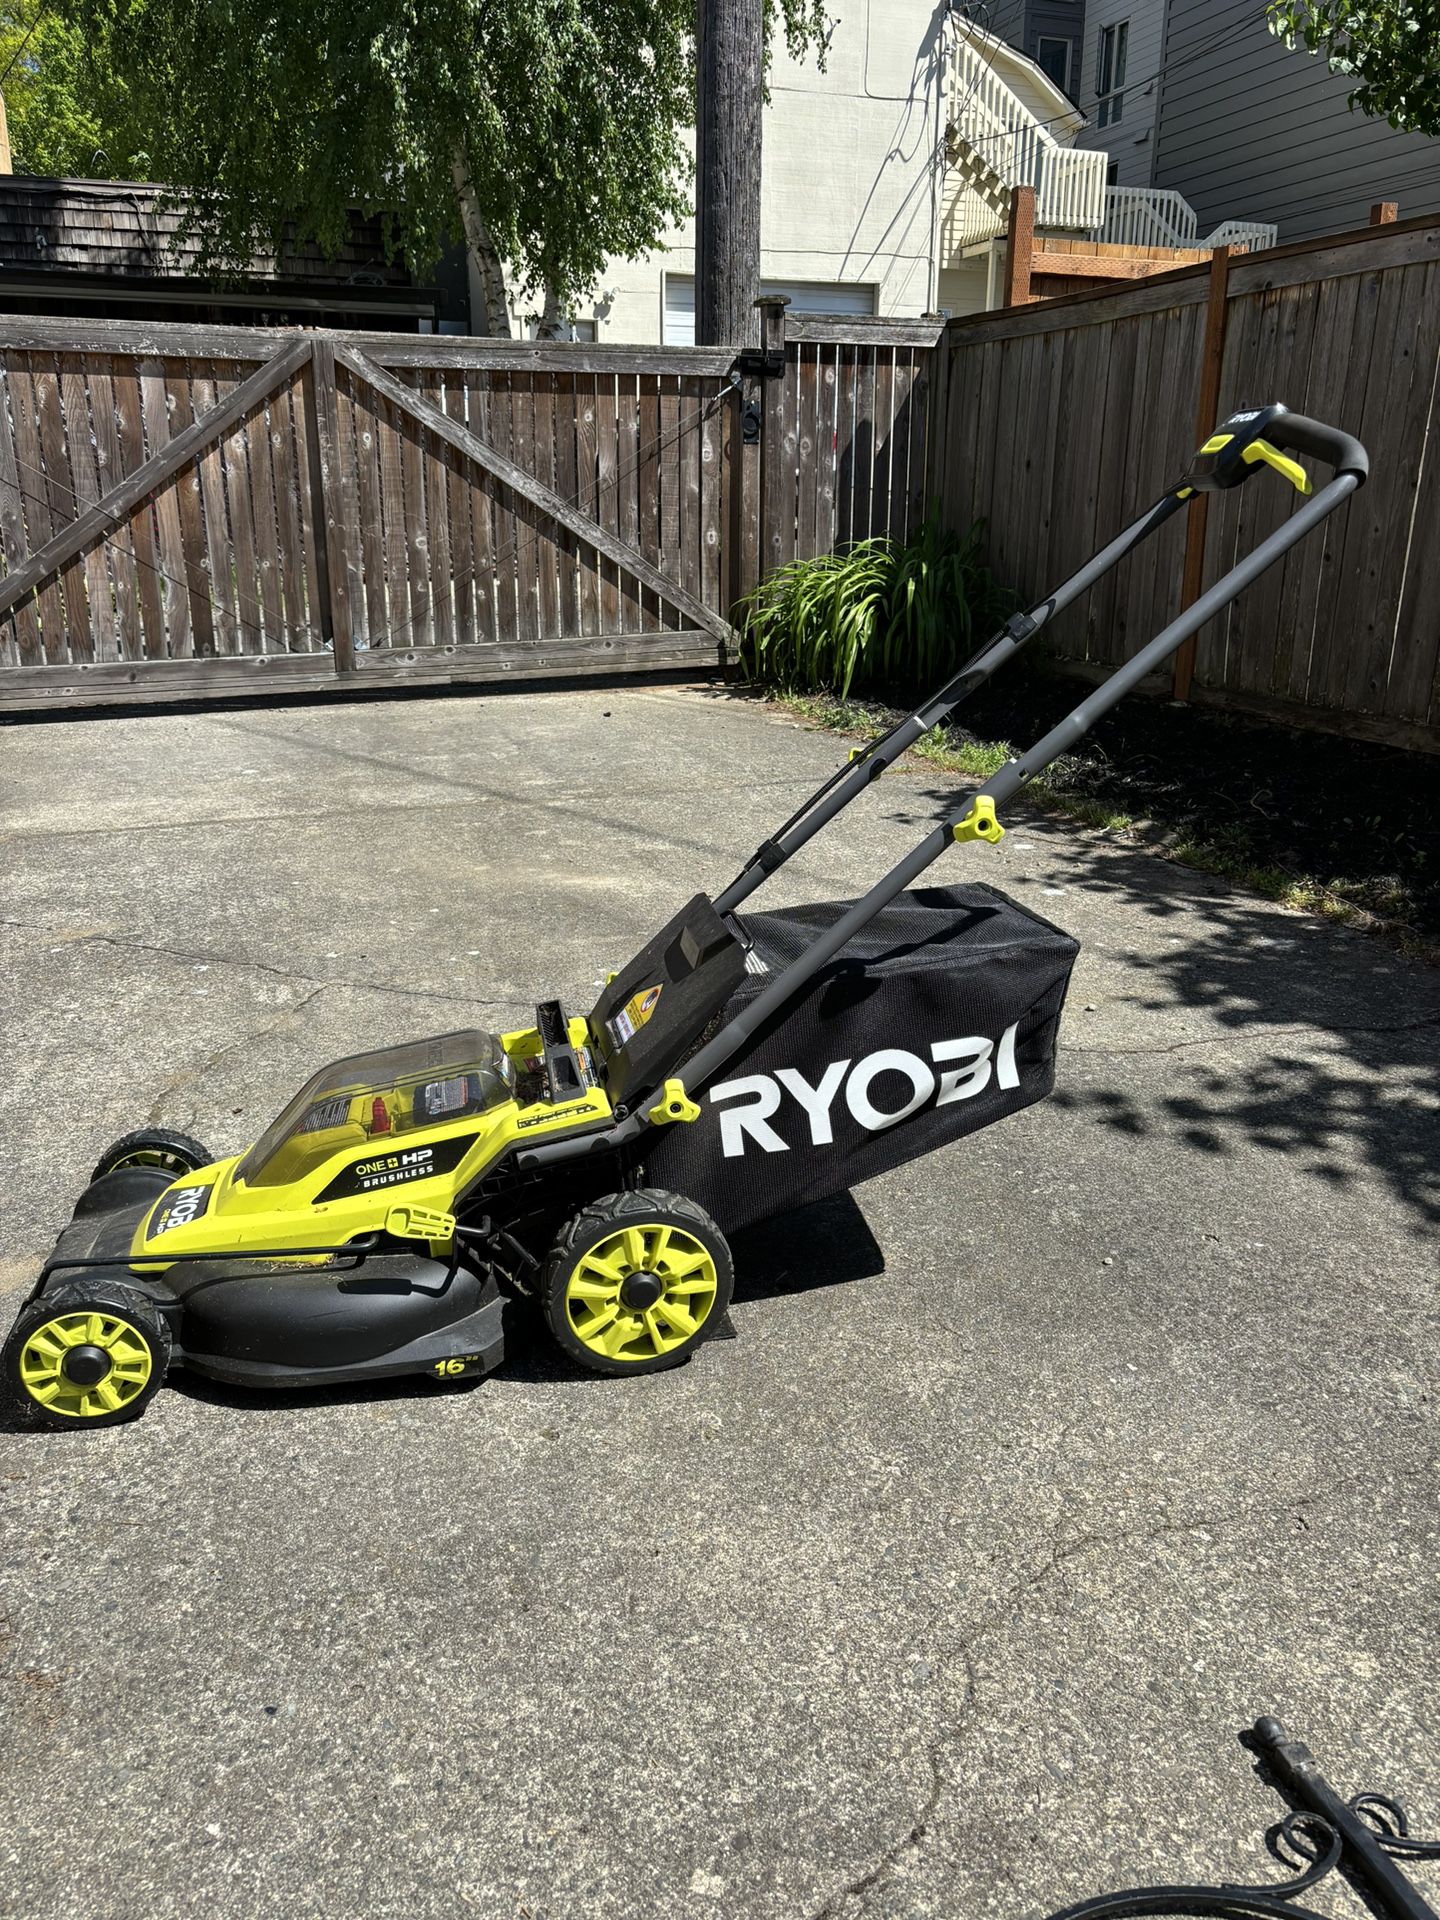 16’ RYOBI electric Lawn Mower + 2 Battery/chargers